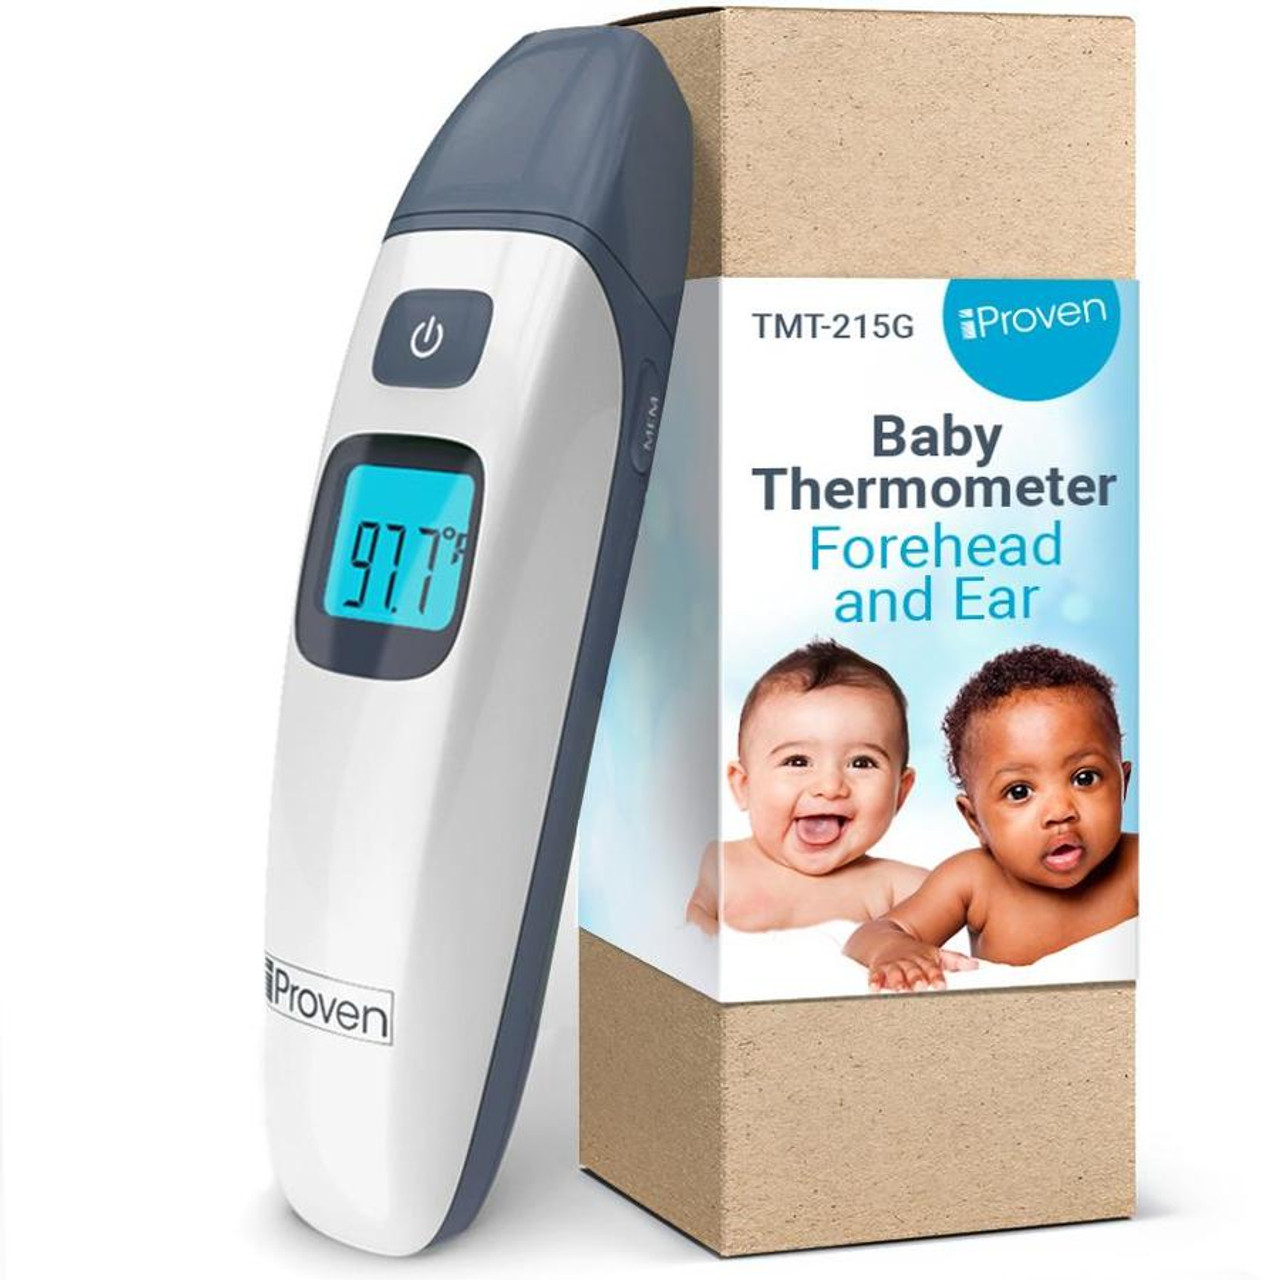 Baby Forehead and Ear Thermometer - Triple Mode - A must-have for families  with babies - TMT-215